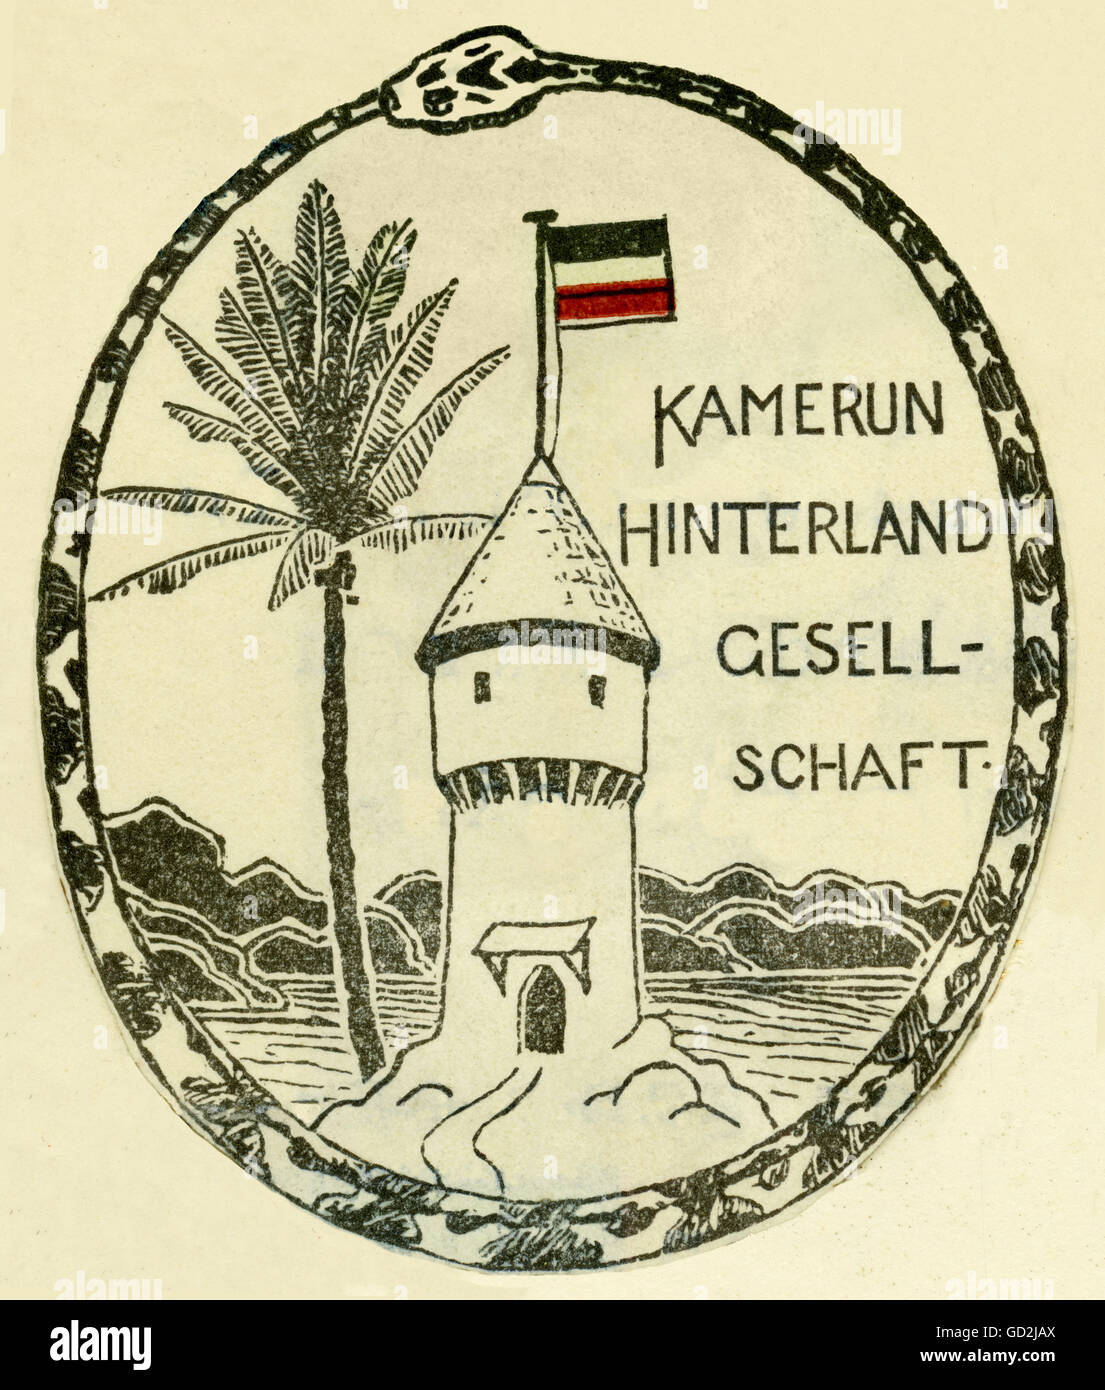 trade, Cameroon back country company, emblem, German trading company in the German colony Cameroon, which only exists circa from 1897 until 1903, Germany, 1898, flag, flags, black-white-red, German dependency, dependency, dependencies, trade with the colonies, economy, German colony, colonialism, imperialism, politics, policy, Africa, 19th century, emblem, emblems, trading company, trading companies, colony, colonies, historic, historical, Additional-Rights-Clearences-Not Available Stock Photo